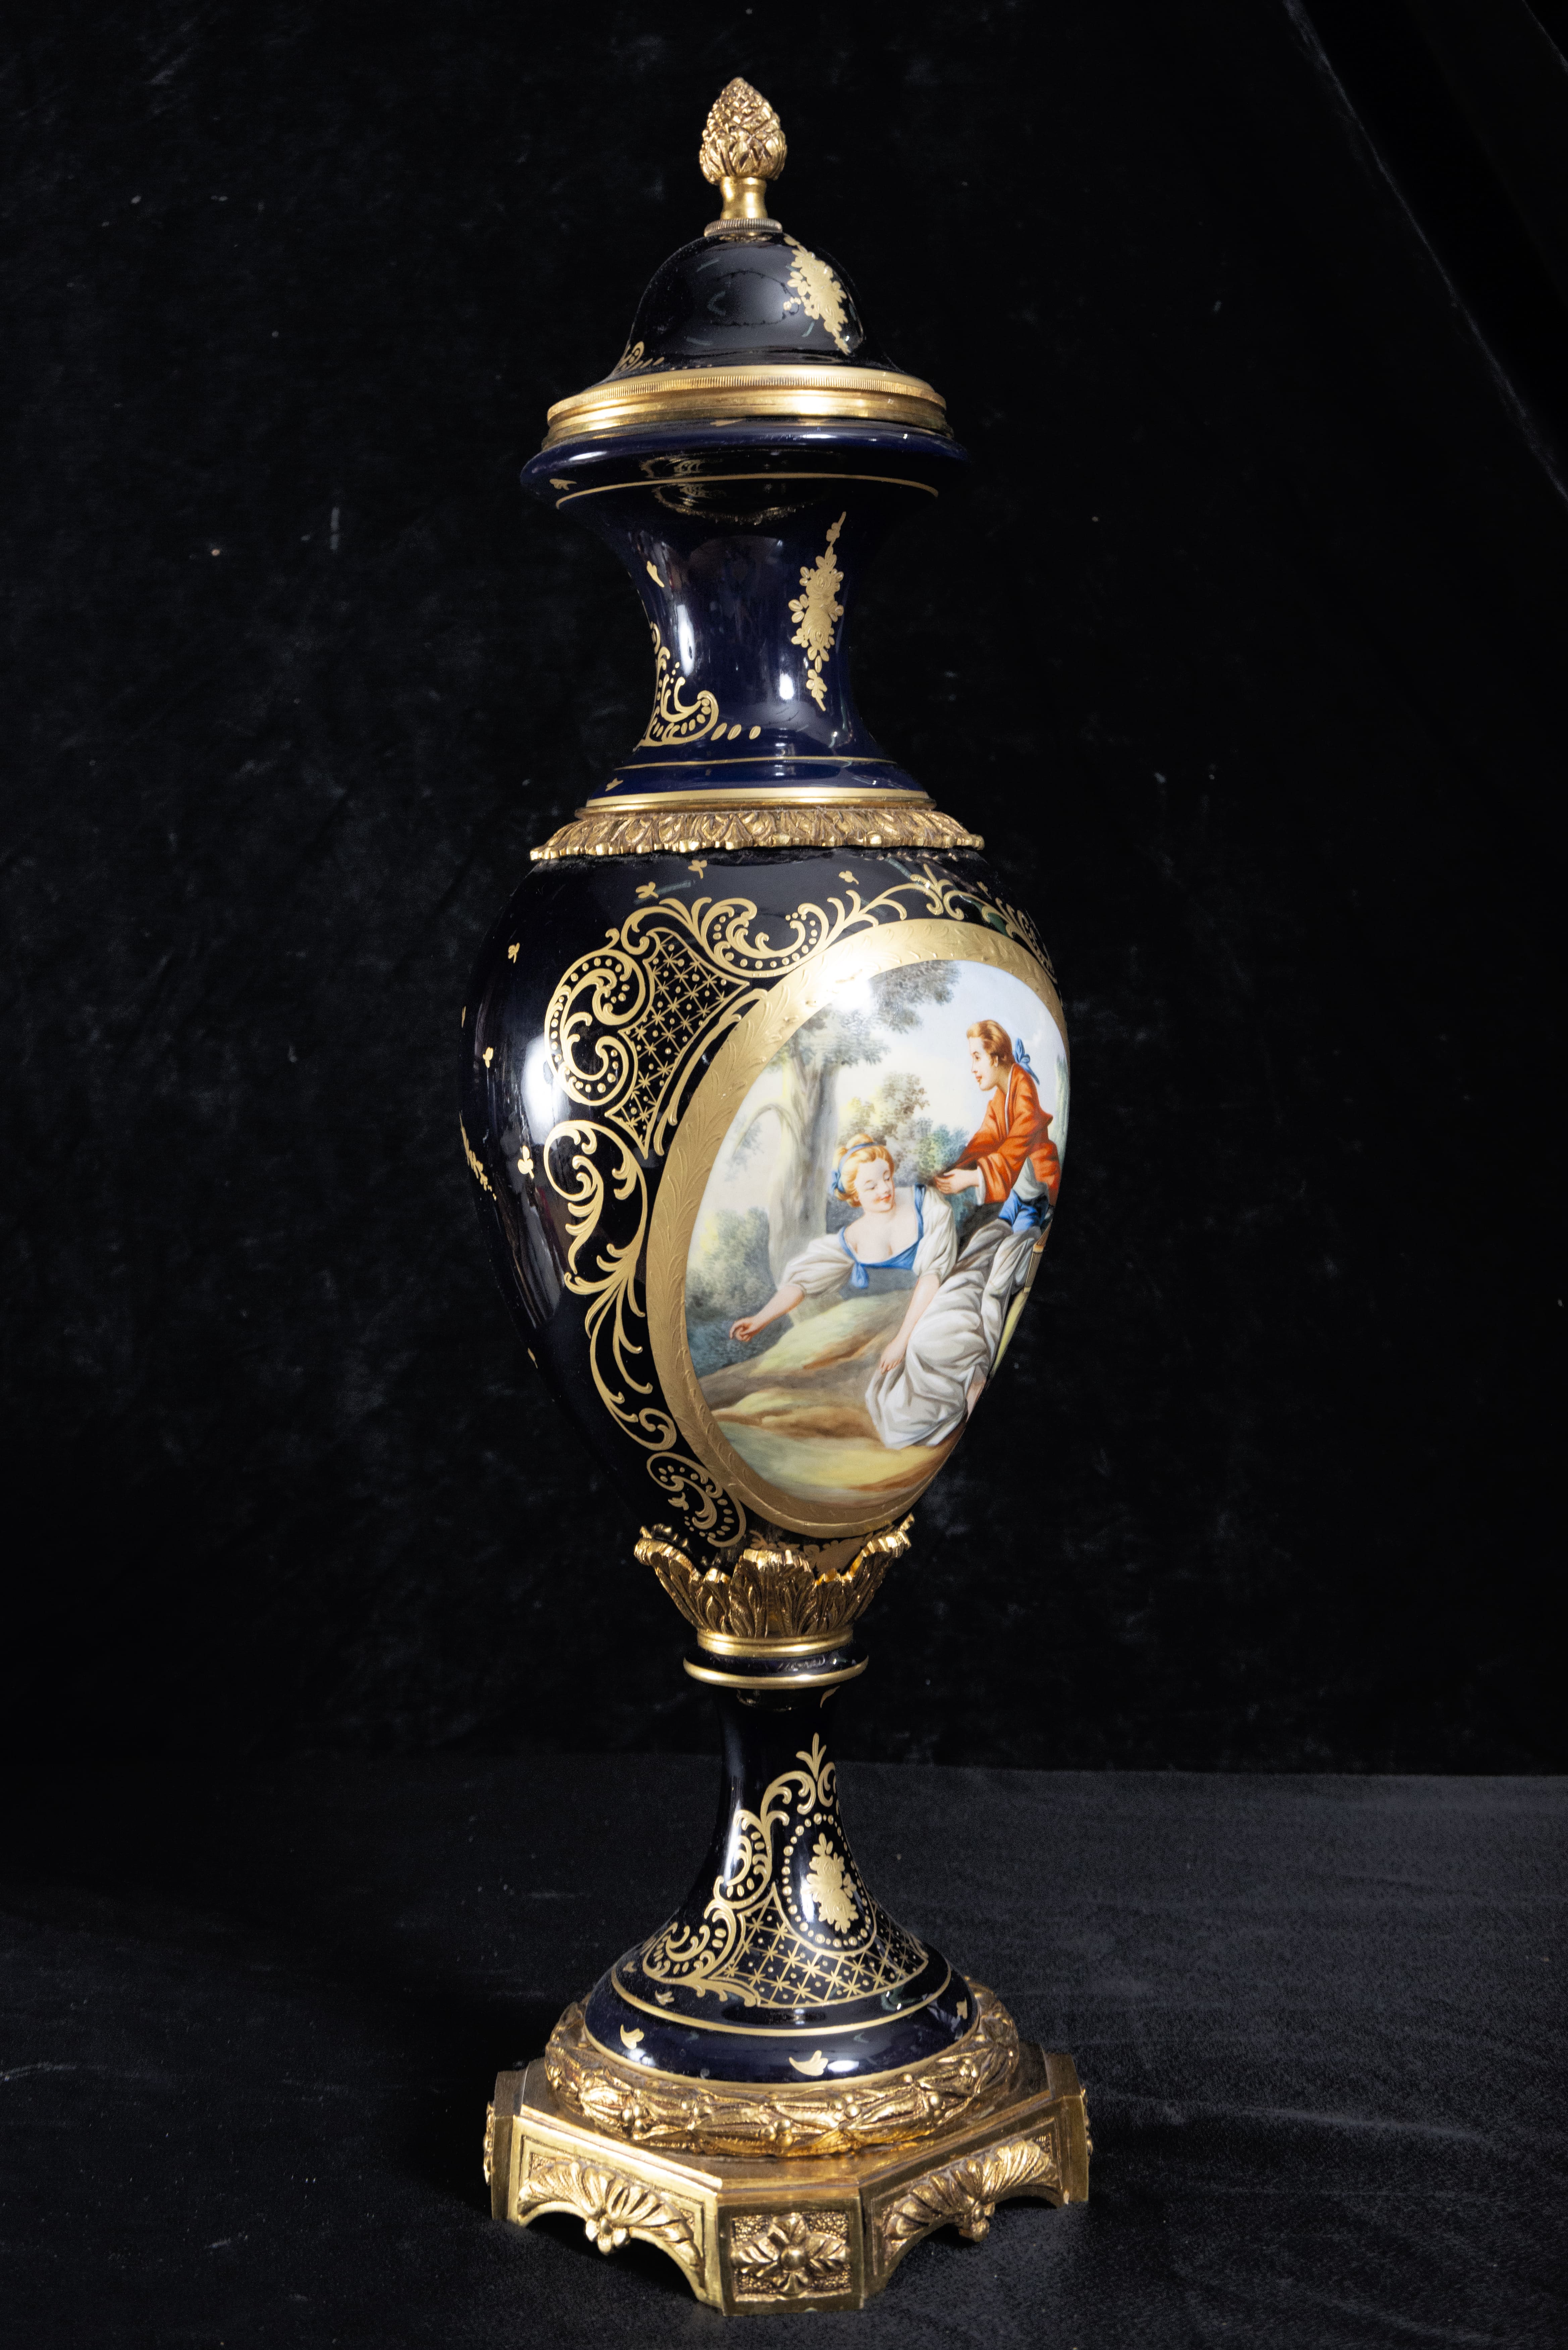 Great pair of French porcelain vases "Sevres Blue", mounted in gilt bronze, late 19th century - Image 6 of 6